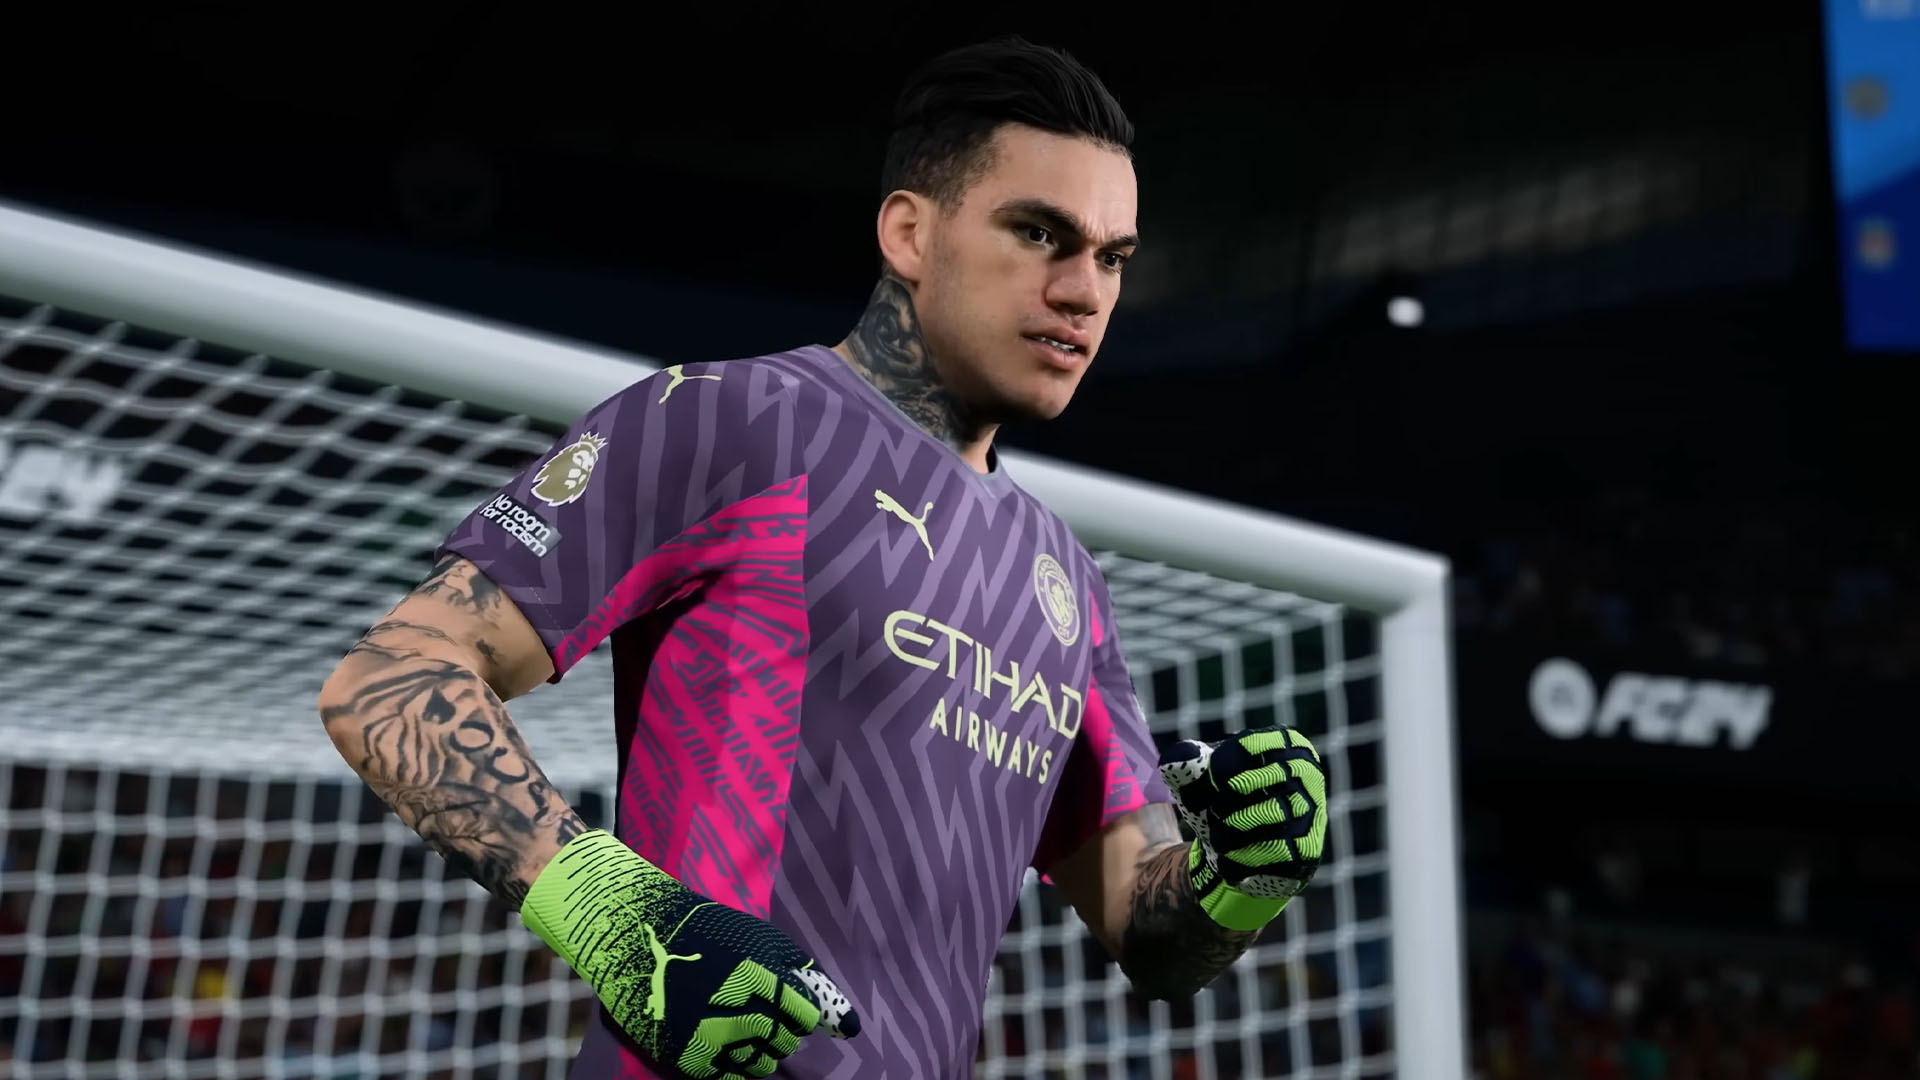 EA Sports FC 24 on track to beat FIFA 23